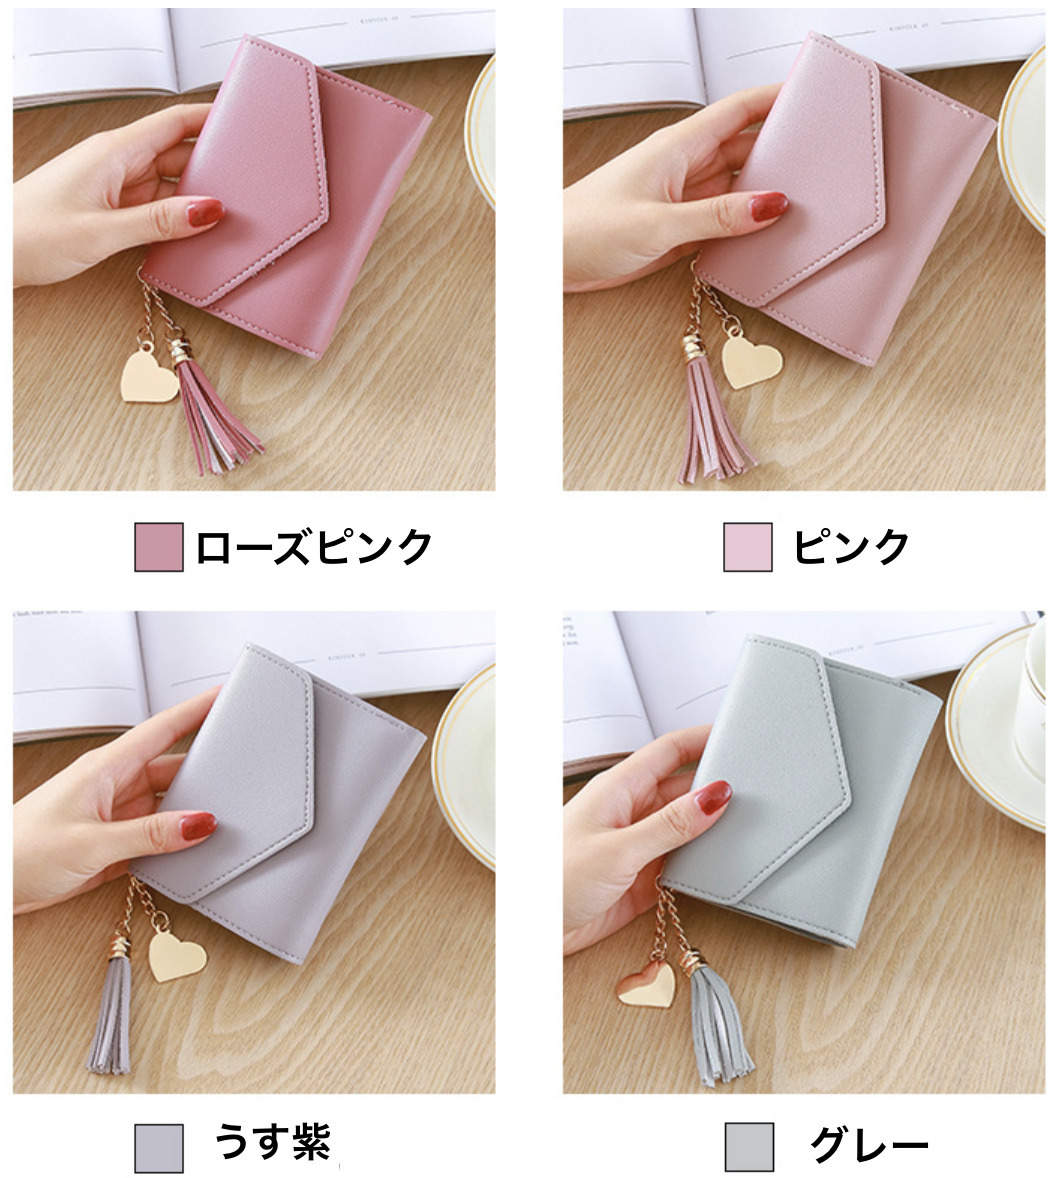  Mini purse pink color folding purse compact size simple design ( anonymity delivery )